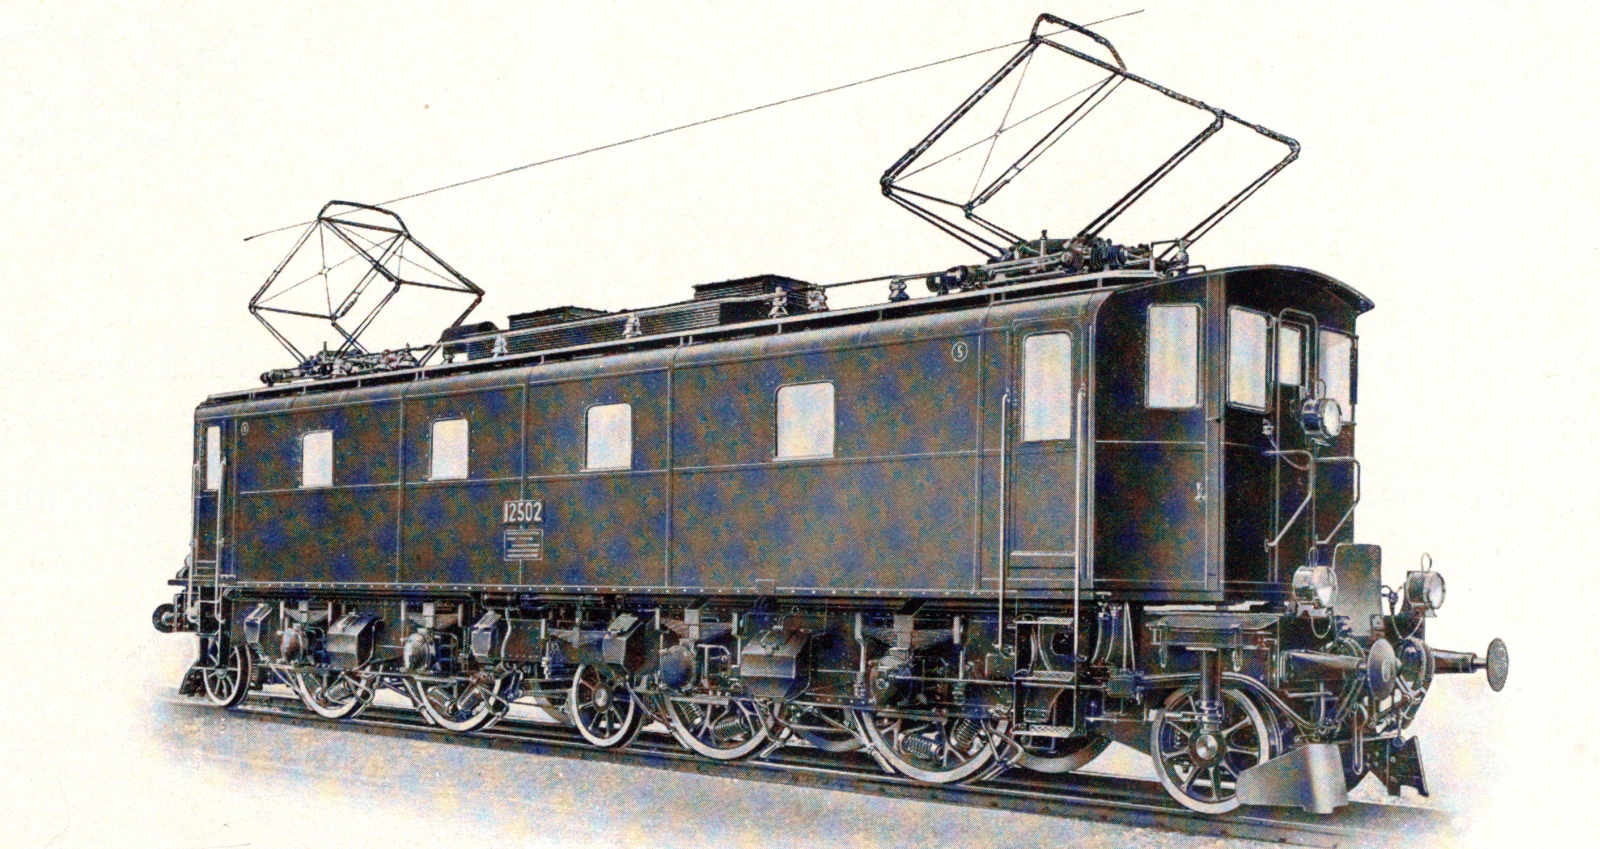 No. 12502 in the SLM data sheet